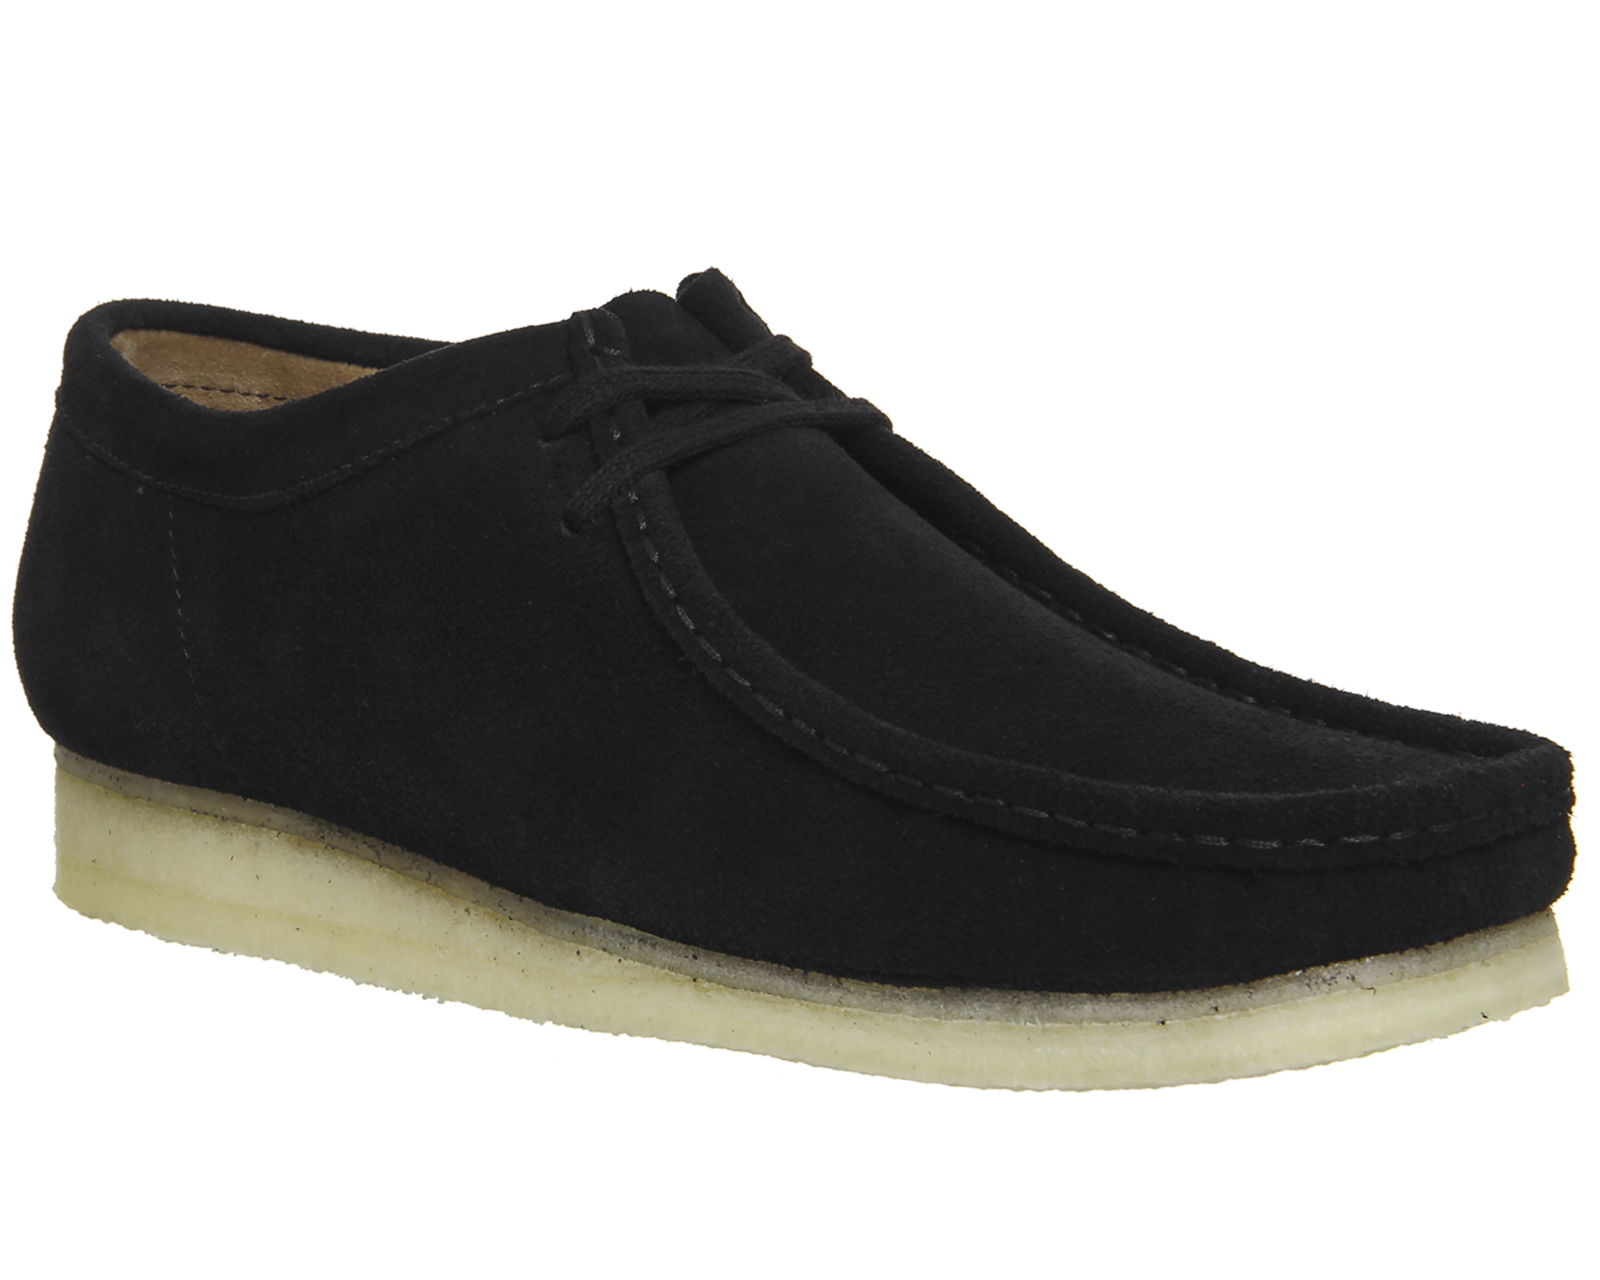 clarks shoes black friday